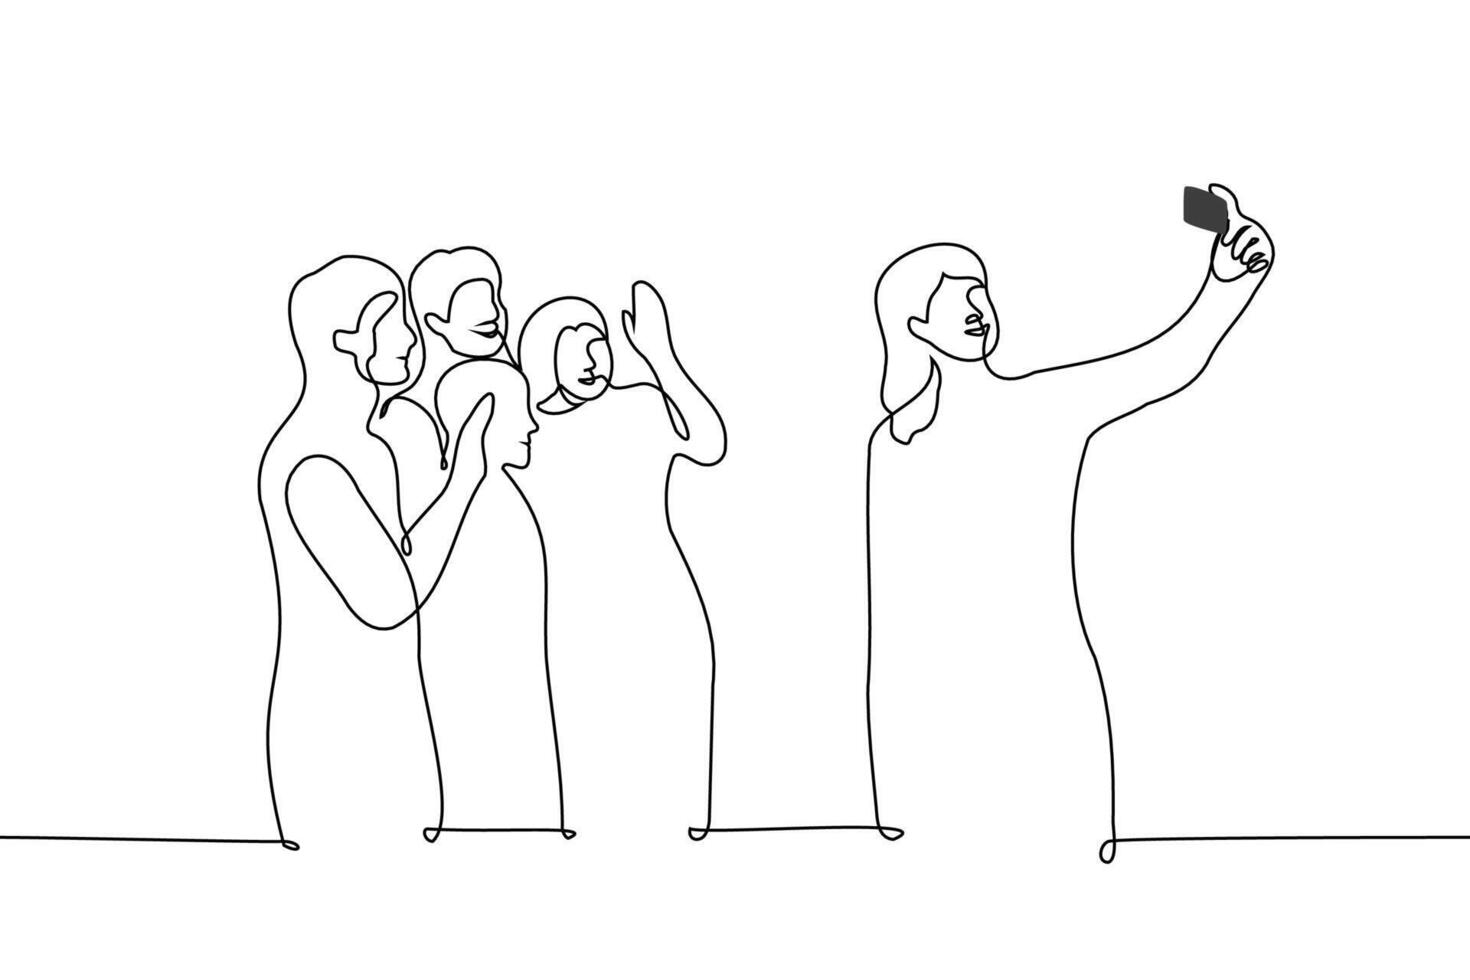 woman taking a selfie in front of a posing group of people they are all smiling - one line drawing vector. concept group photo, friends posing for a photo shot vector